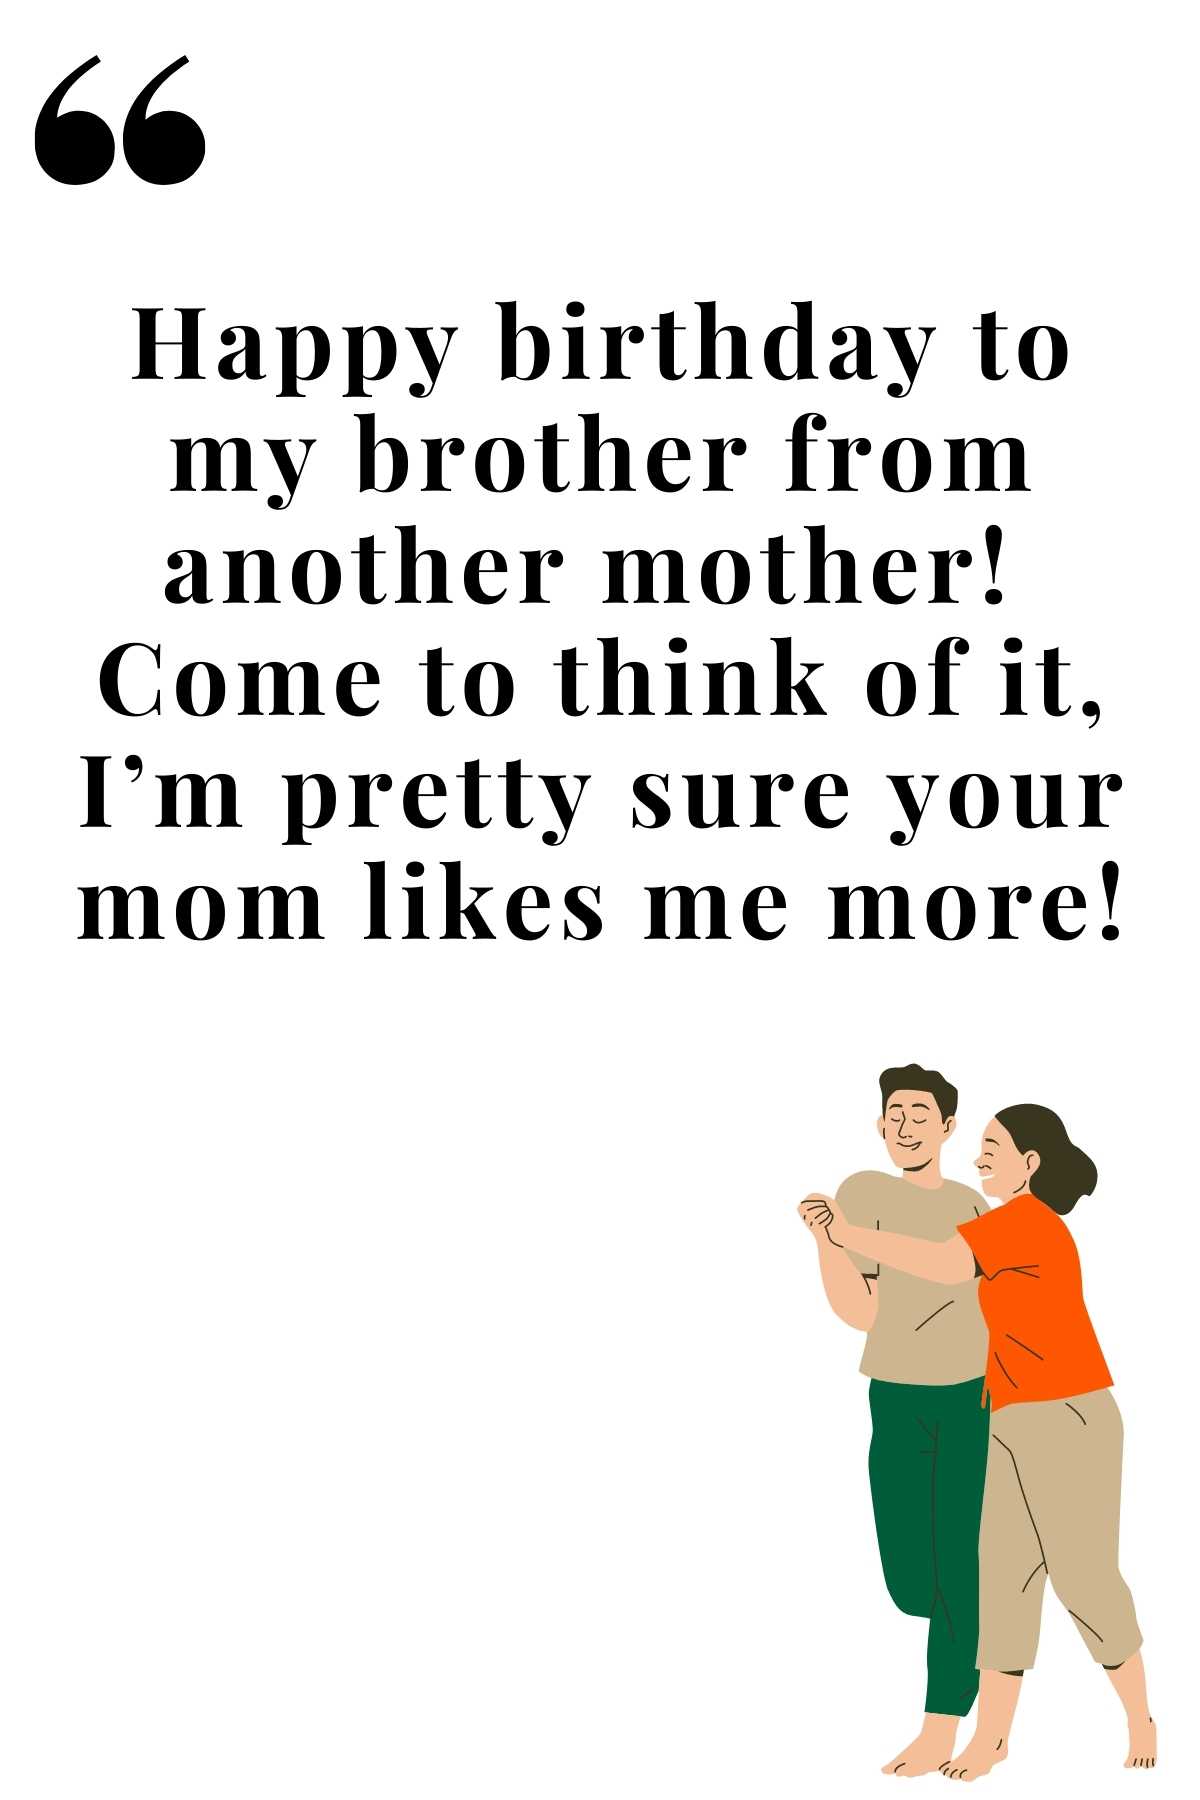 91+ Best Brother From Another Mother Quotes, Birthday Wishes